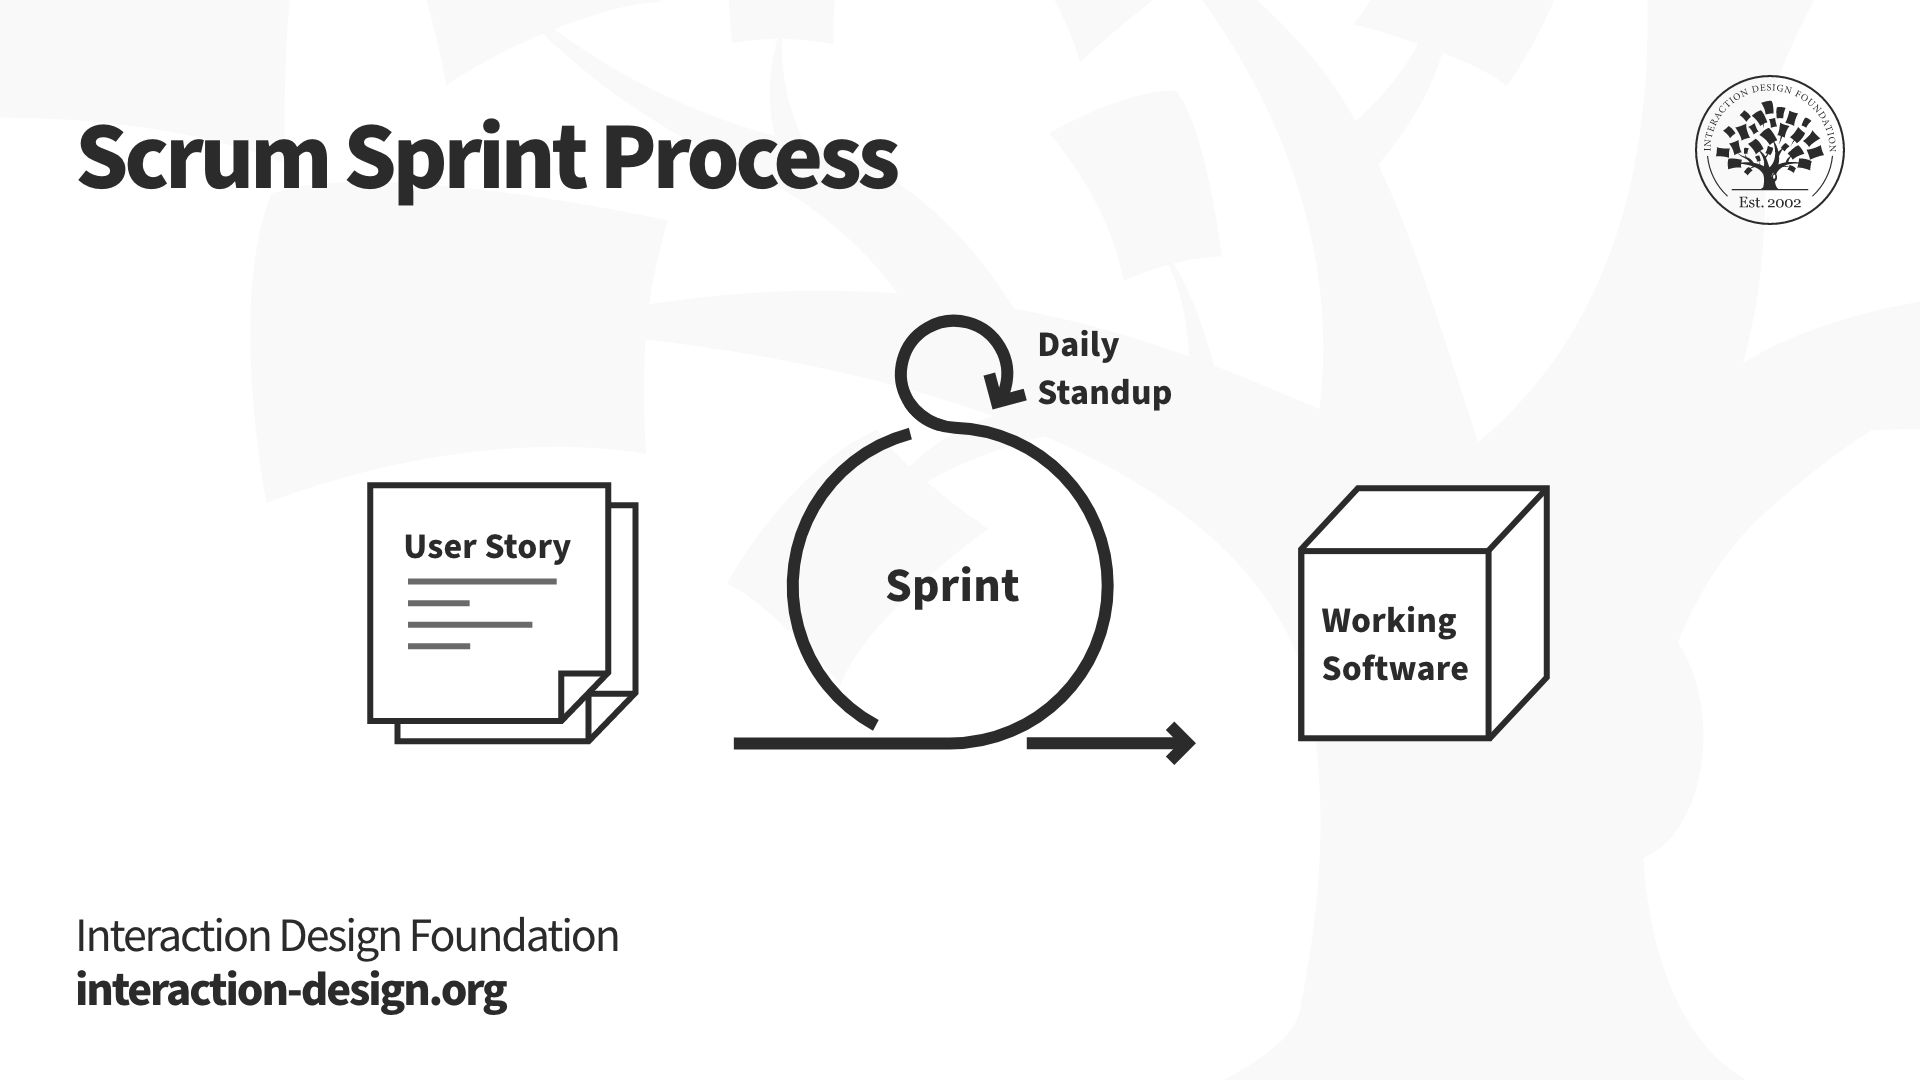 The Scrum sprint process is a cyclical, iterative process that includes a periodic evaluation of customer feedback.